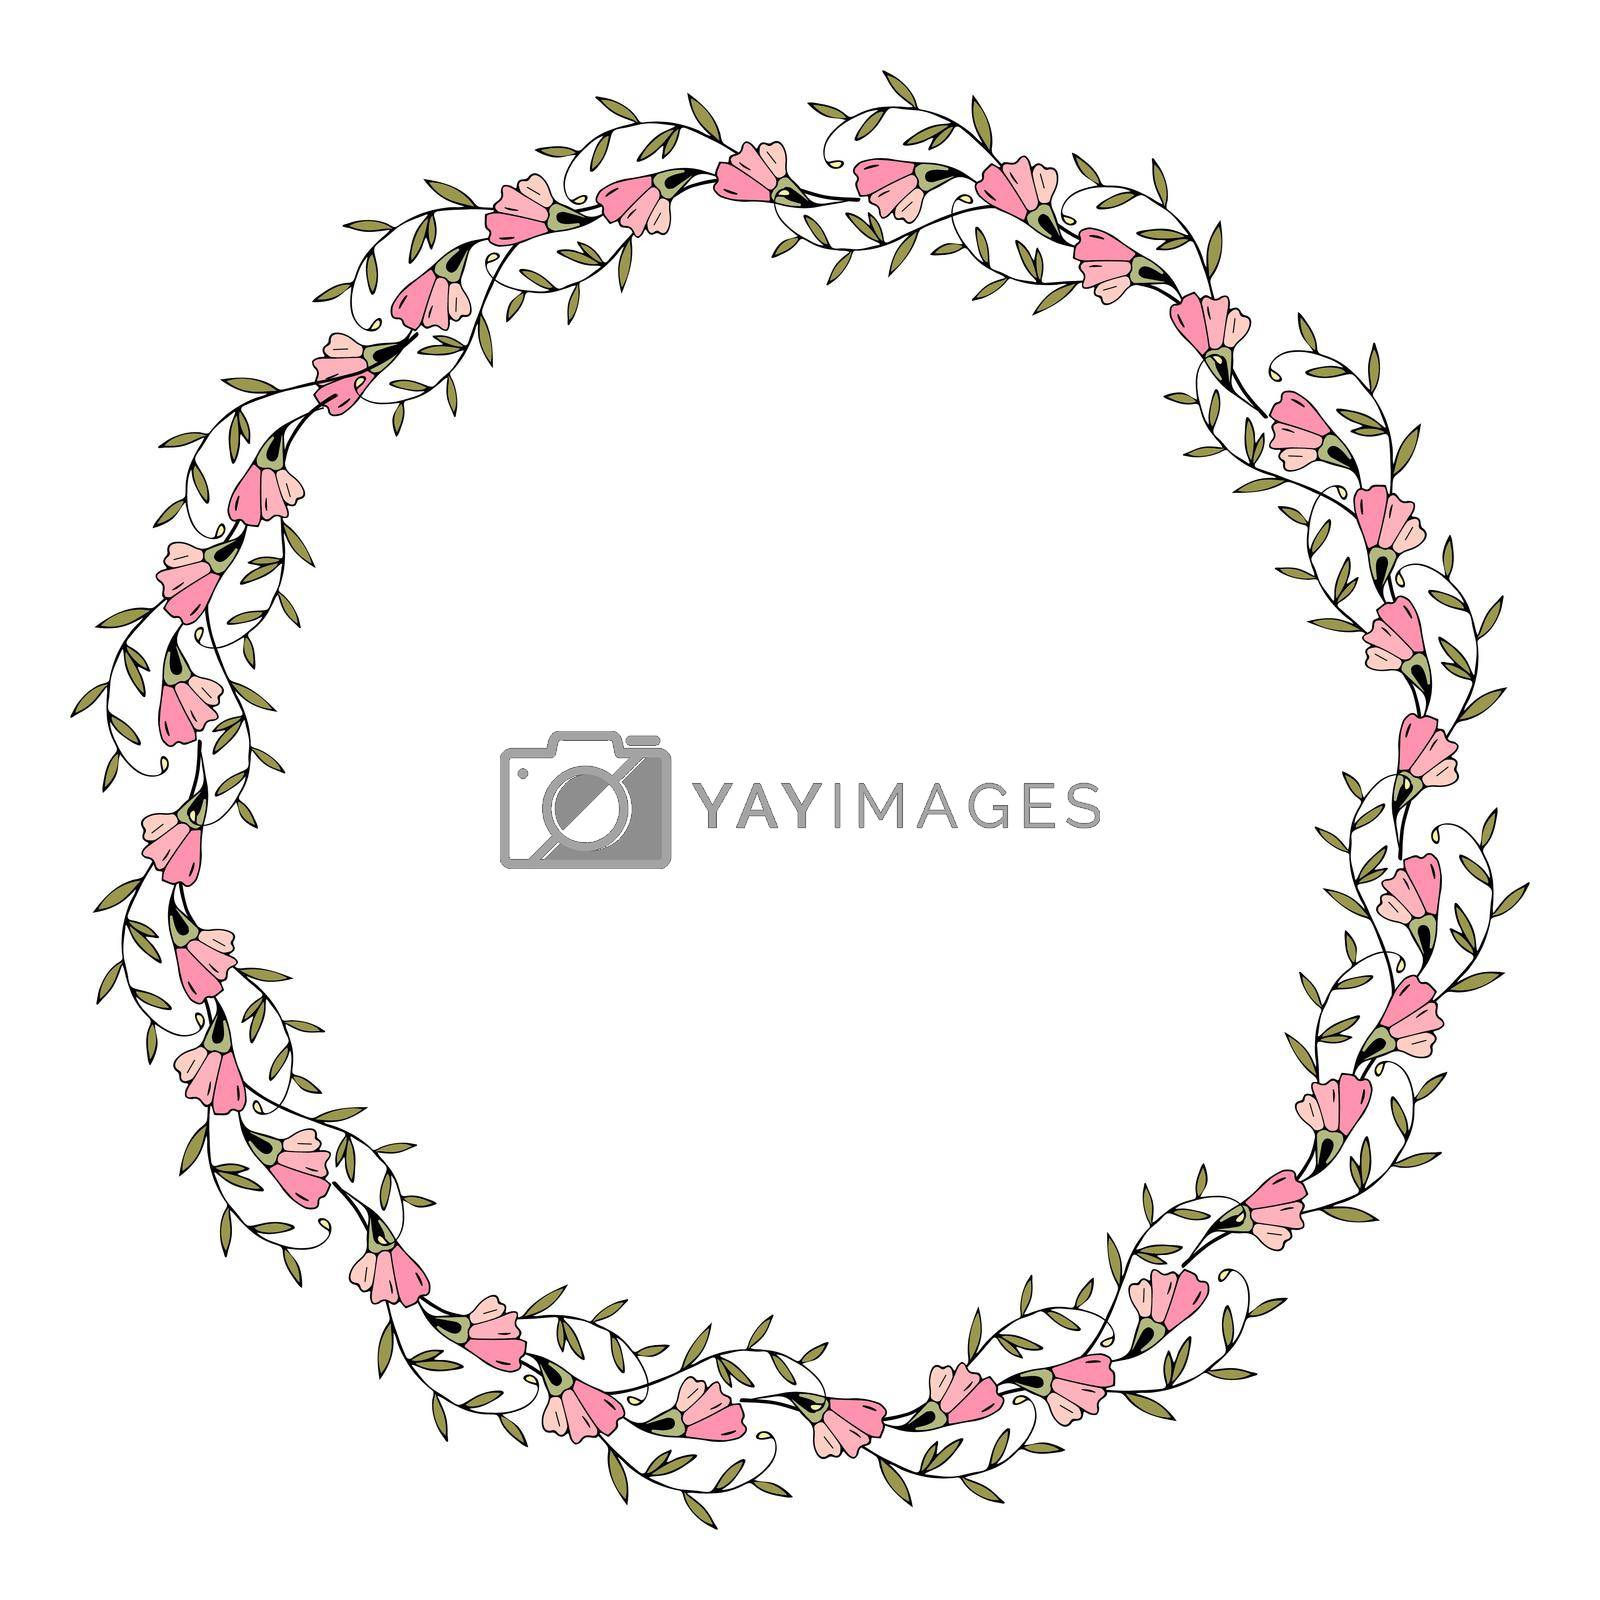 Royalty free image of Wreath flowers hand drawn doodle, wedding decoration, round frame. by Margo